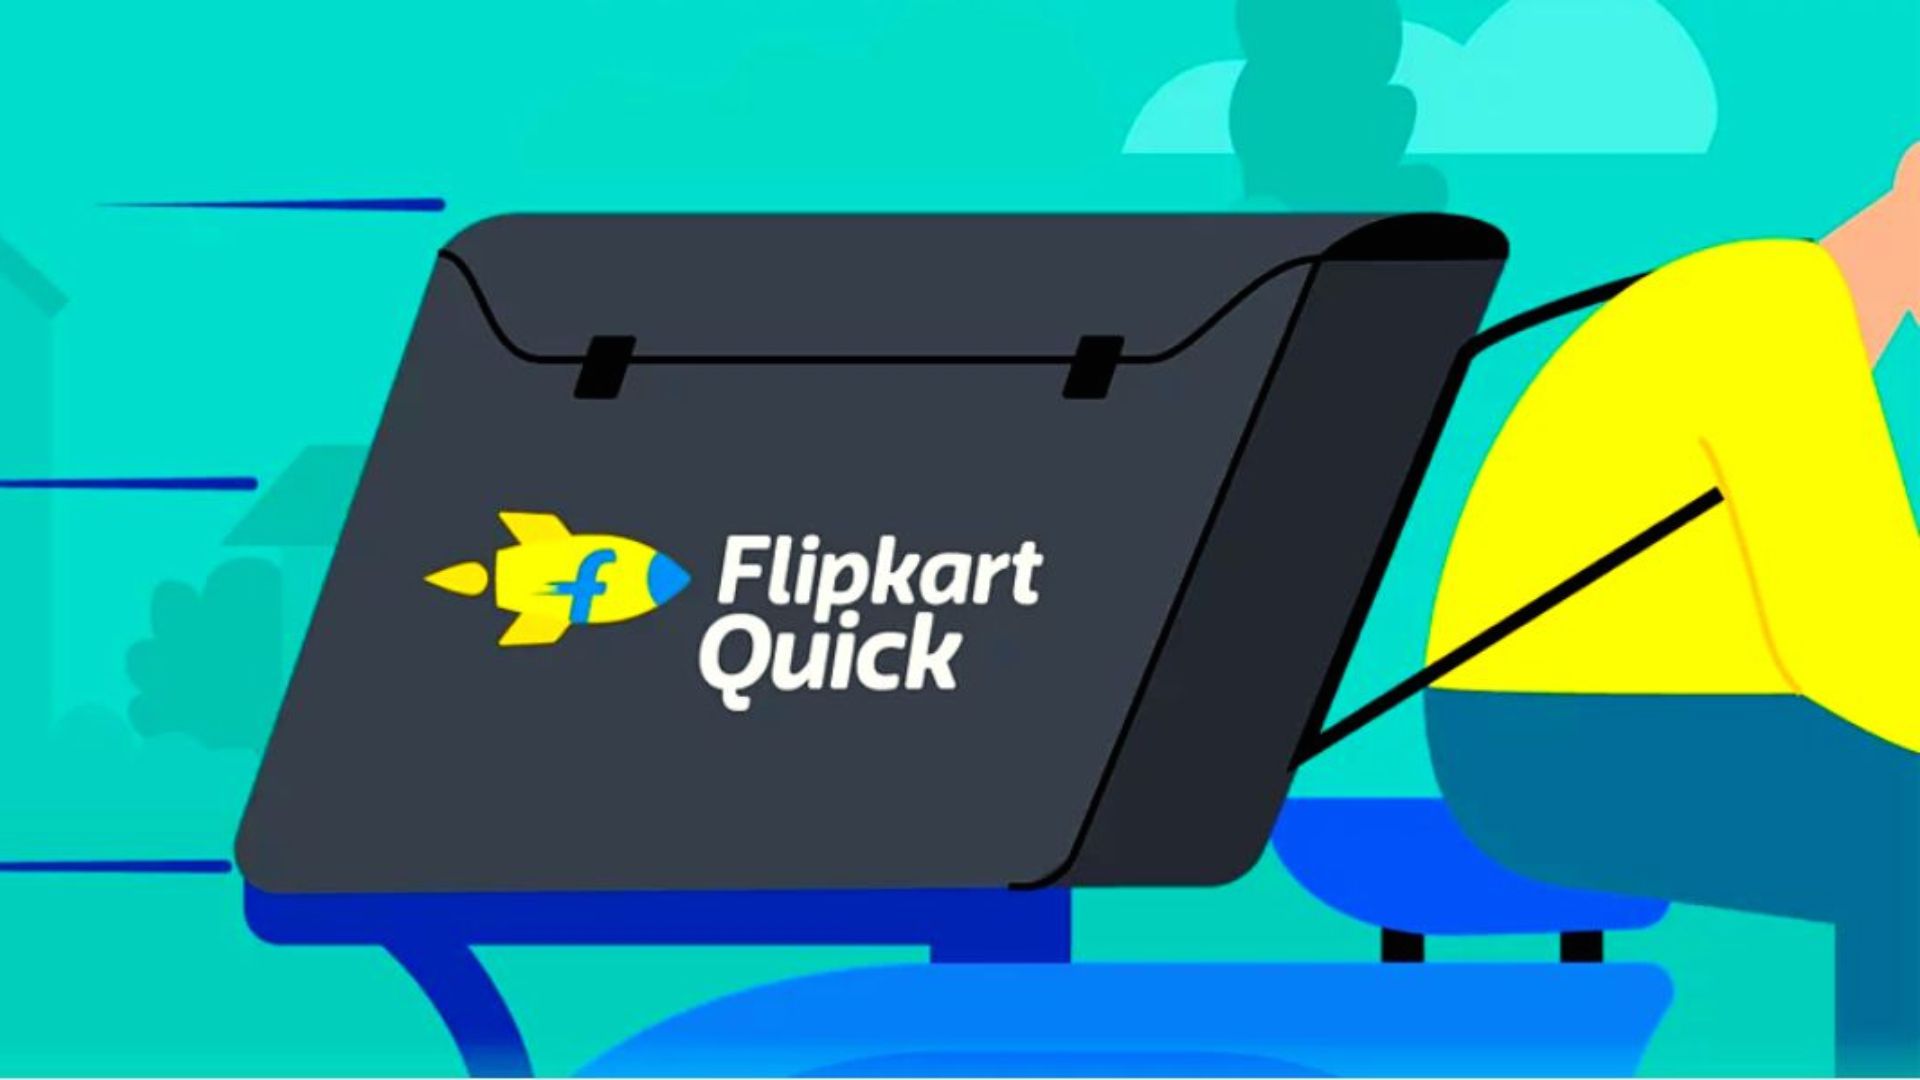 How to Get Fast Delivery on Flipkart? Get Delivery in 90 Minutes